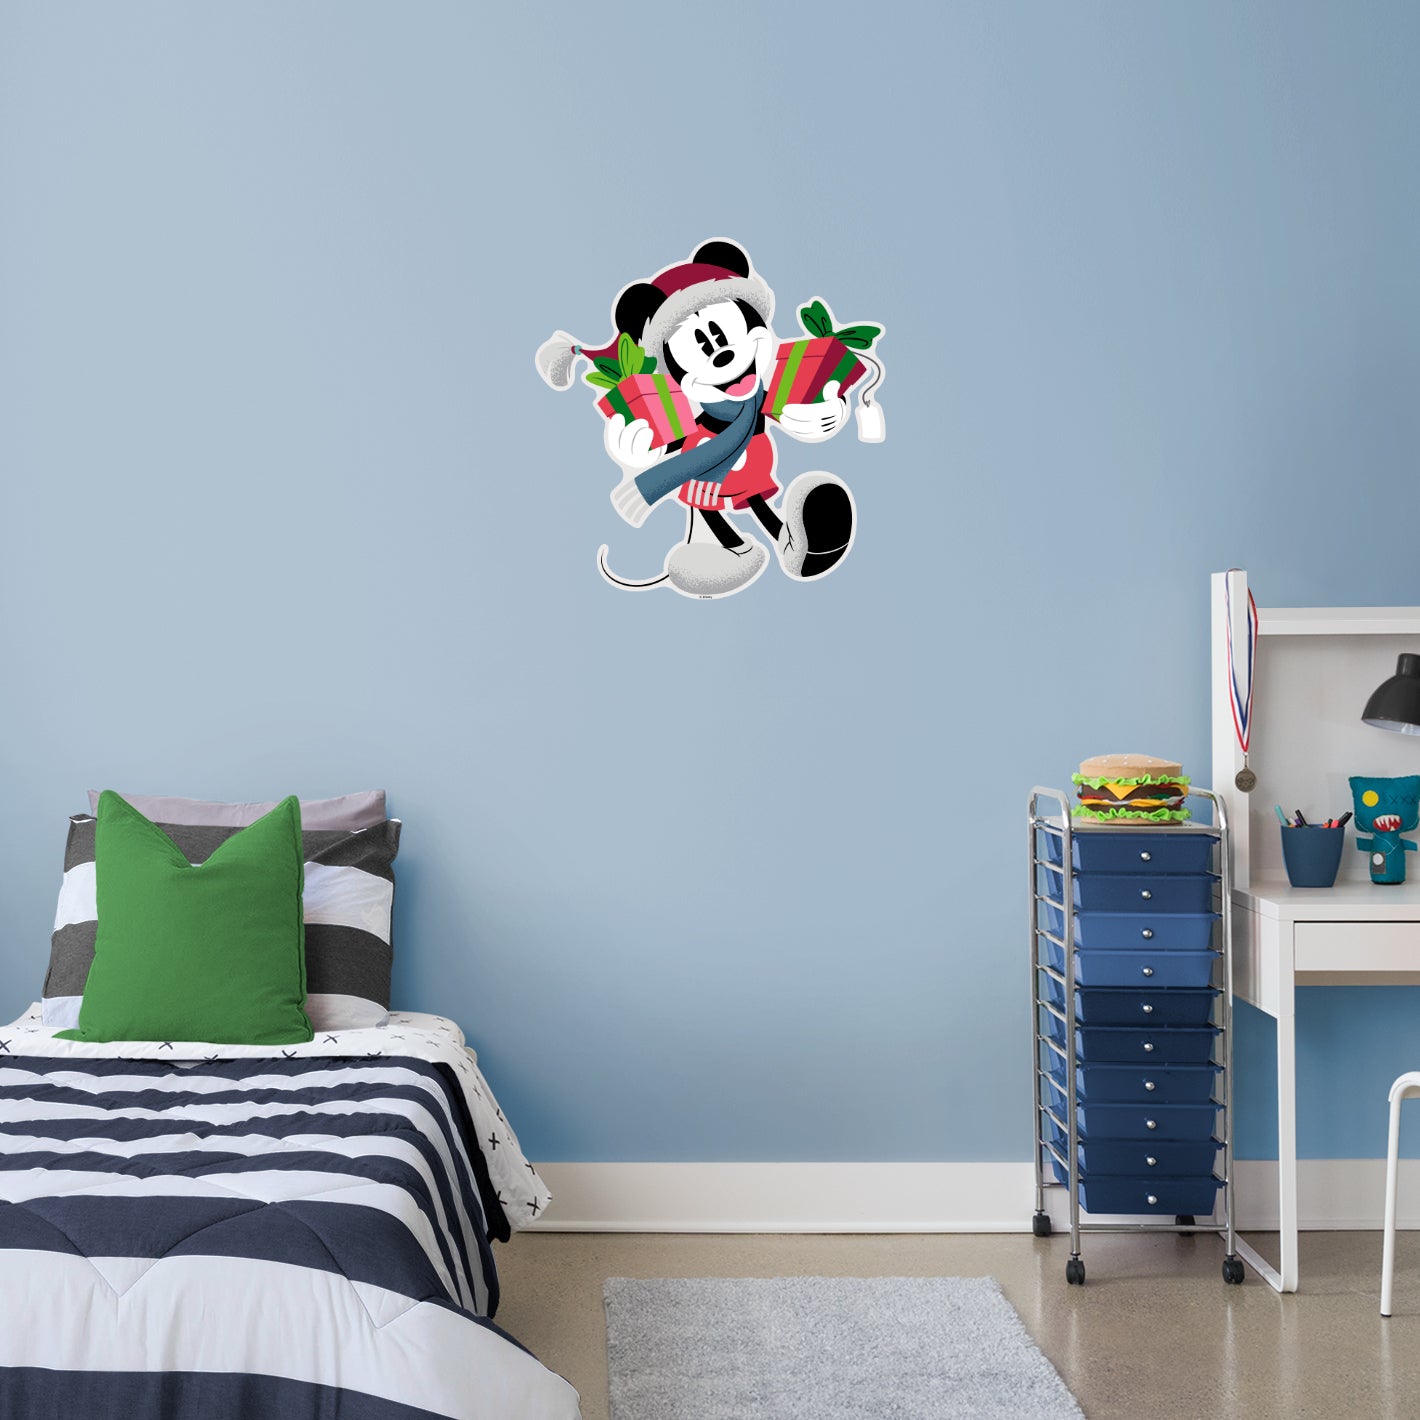 Festive Cheer: Mickey Mouse Gifts Holiday Real Big        - Officially Licensed Disney Removable     Adhesive Decal